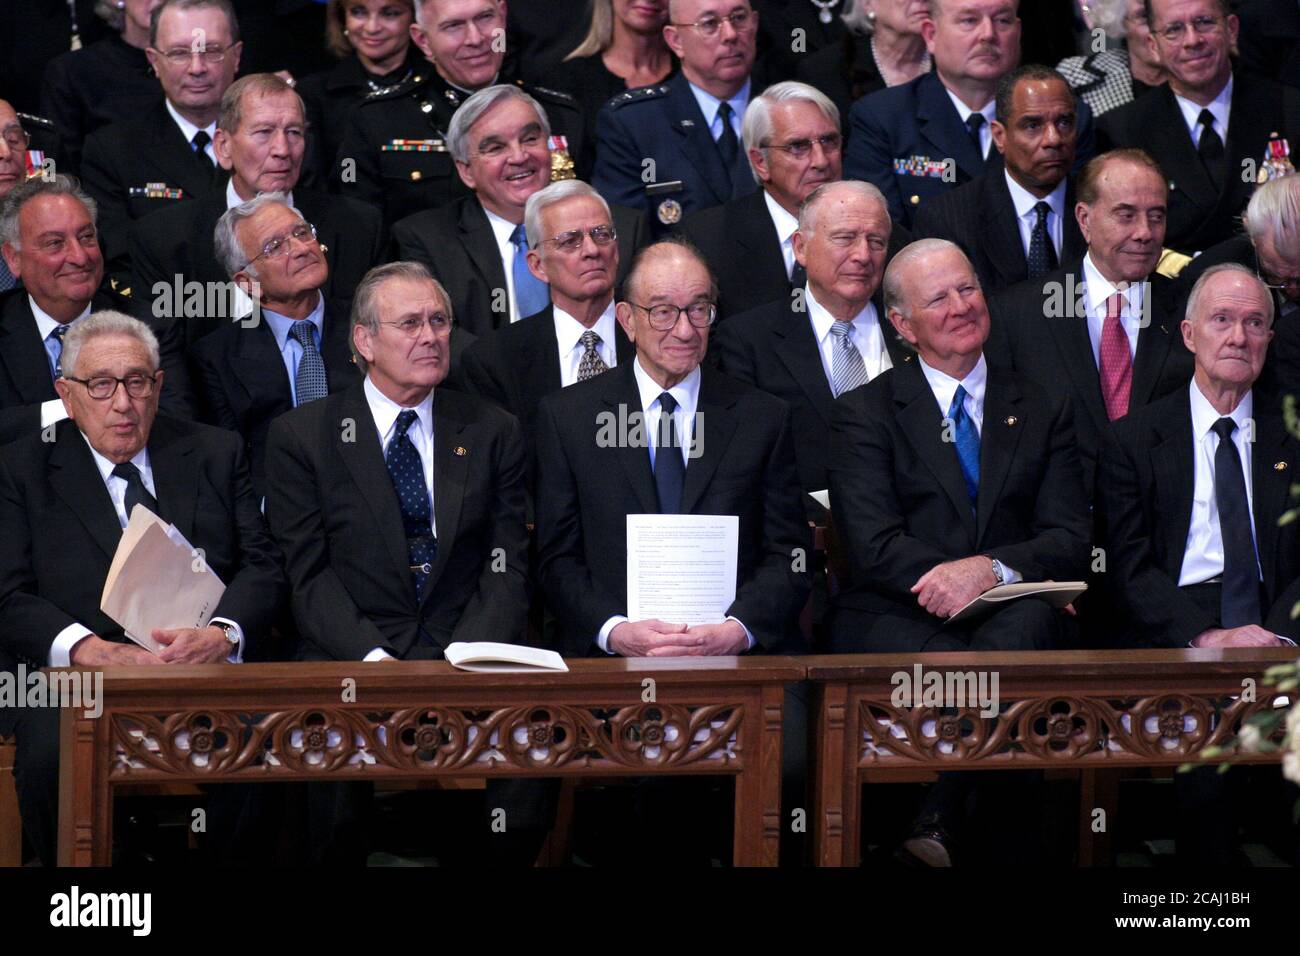 In this file photo, Former Secretary of State Henry Kissinger, former Secretary of Defense Donald Rumsfeld, former Chairman of the Federal Reserve Alan Greenspan, former Secretary of State James A. Baker, III, and former National Security advisor Brent Scowcroft watch the proceedings at the State Funeral for former United States President Gerald R. Ford at the Washington National Cathedral, in Washington, D.C. on Tuesday, January 2, 2007.  Former U.S. Senator Bob Dole (Republican of Kansas) is seated behind Scowcroft..Credit: Ron Sachs / CNP.[NOTE: No New York Metro or other Newspapers within Stock Photo